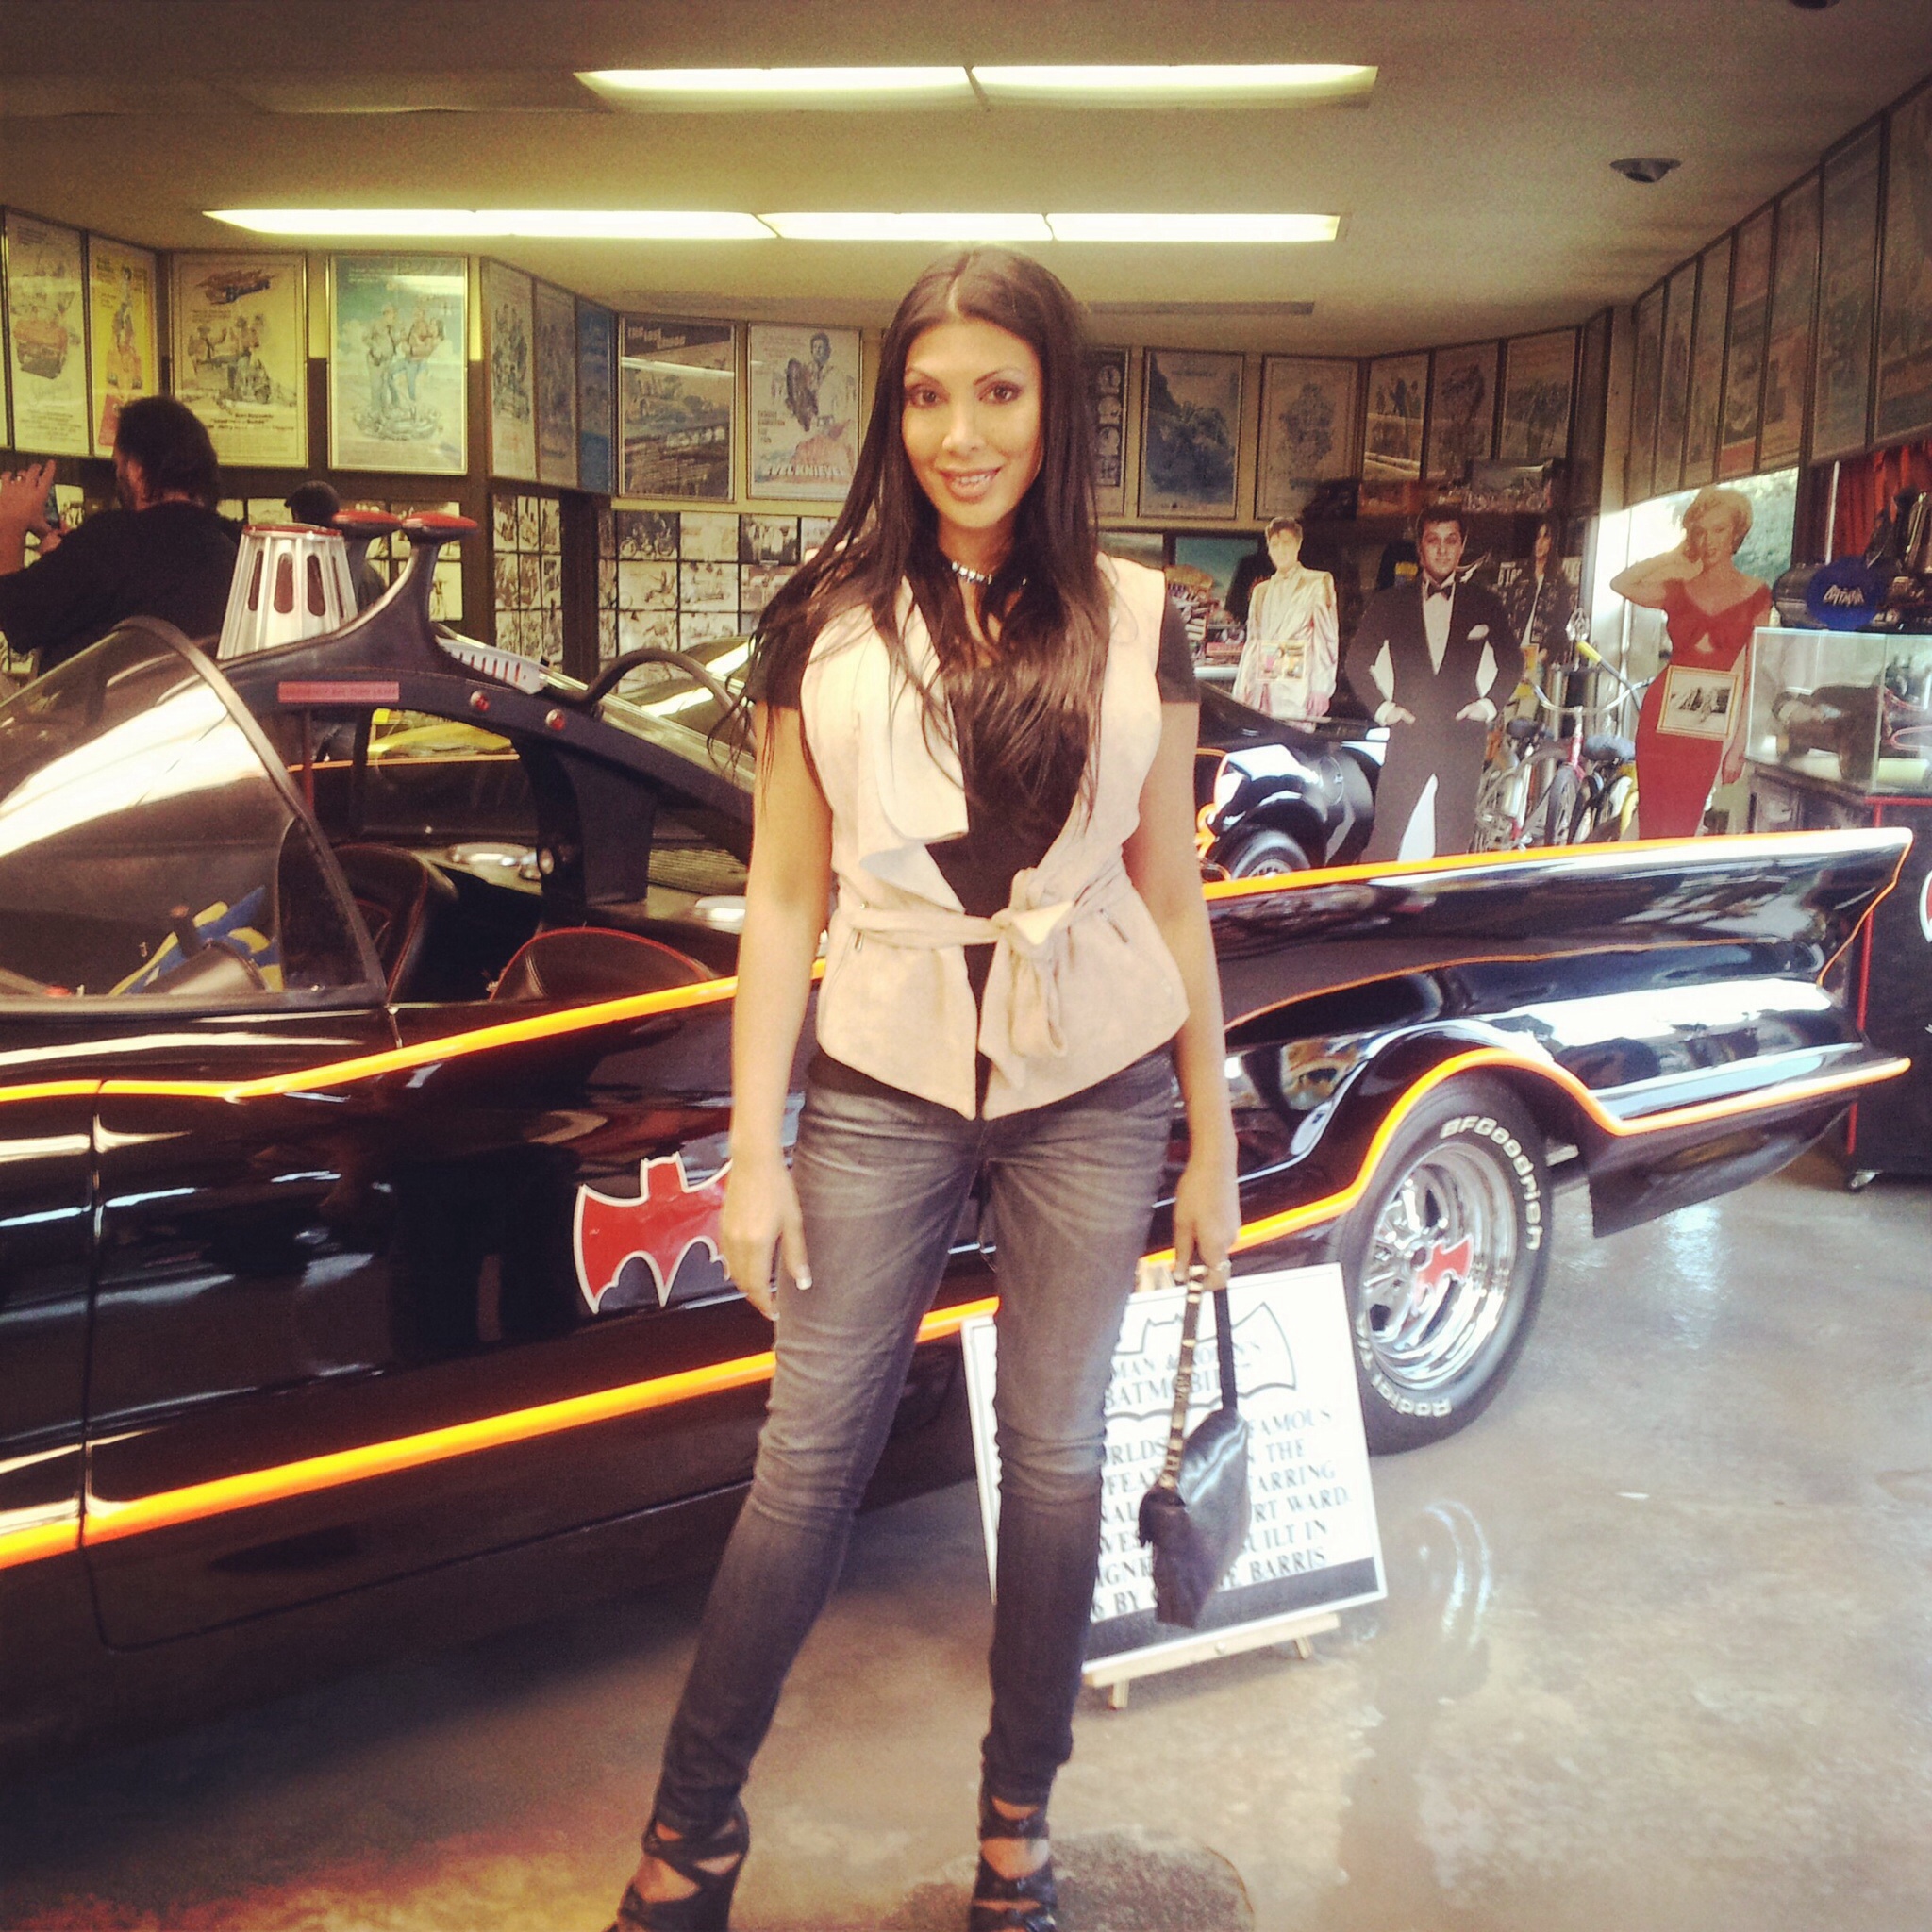 At George Barris's bday party in front of the original bat mobile